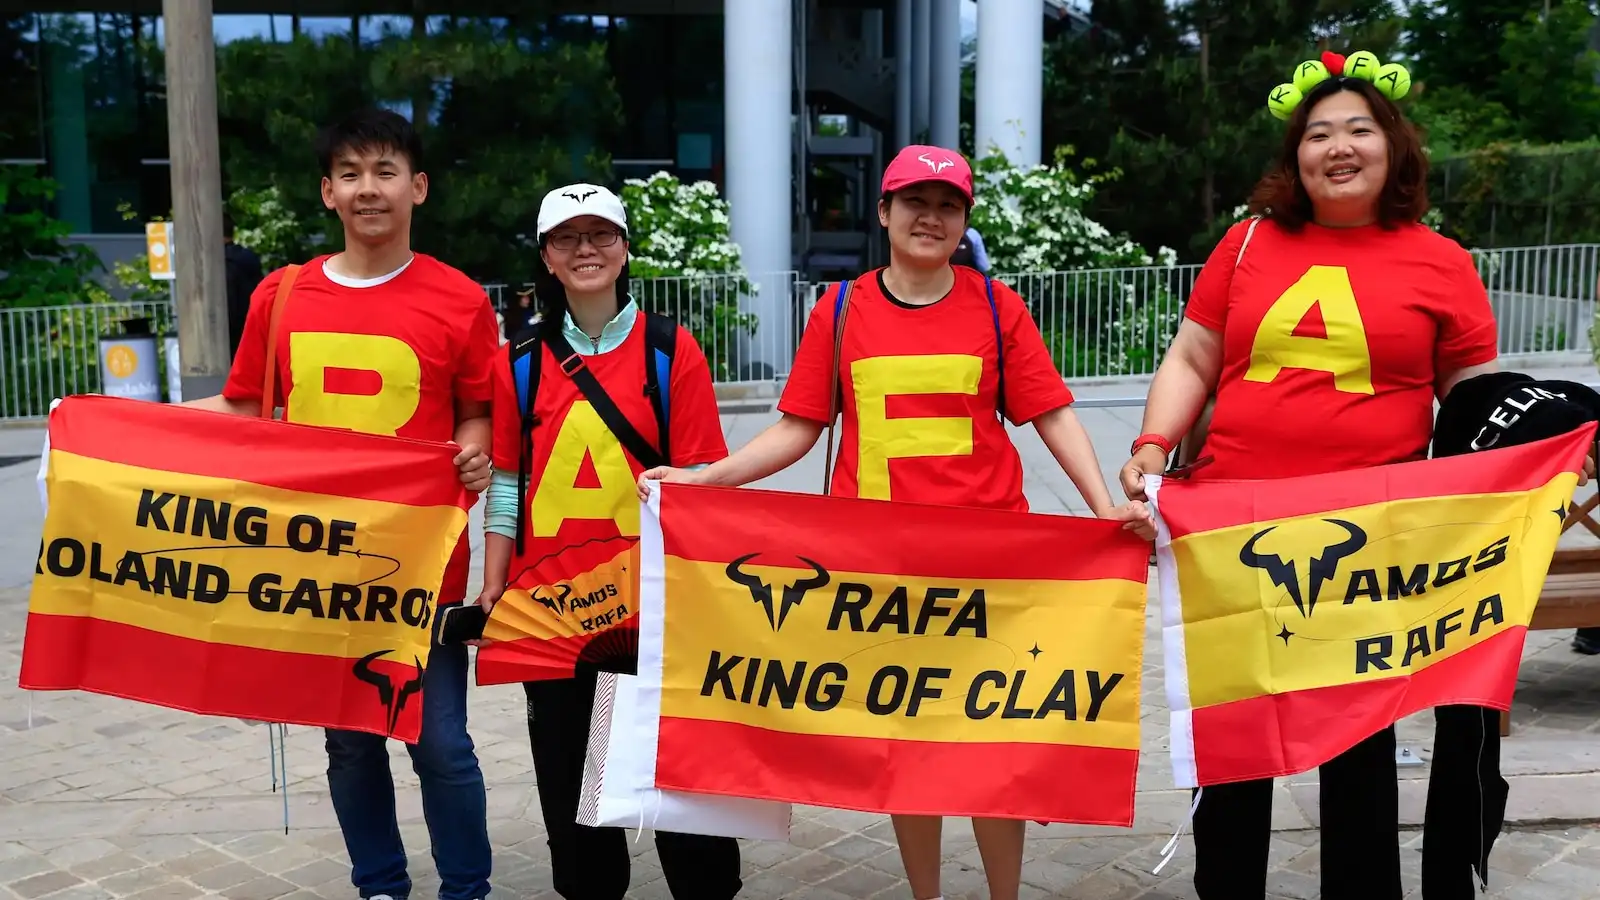 Rafael Nadal French Open farewell attracts global fans